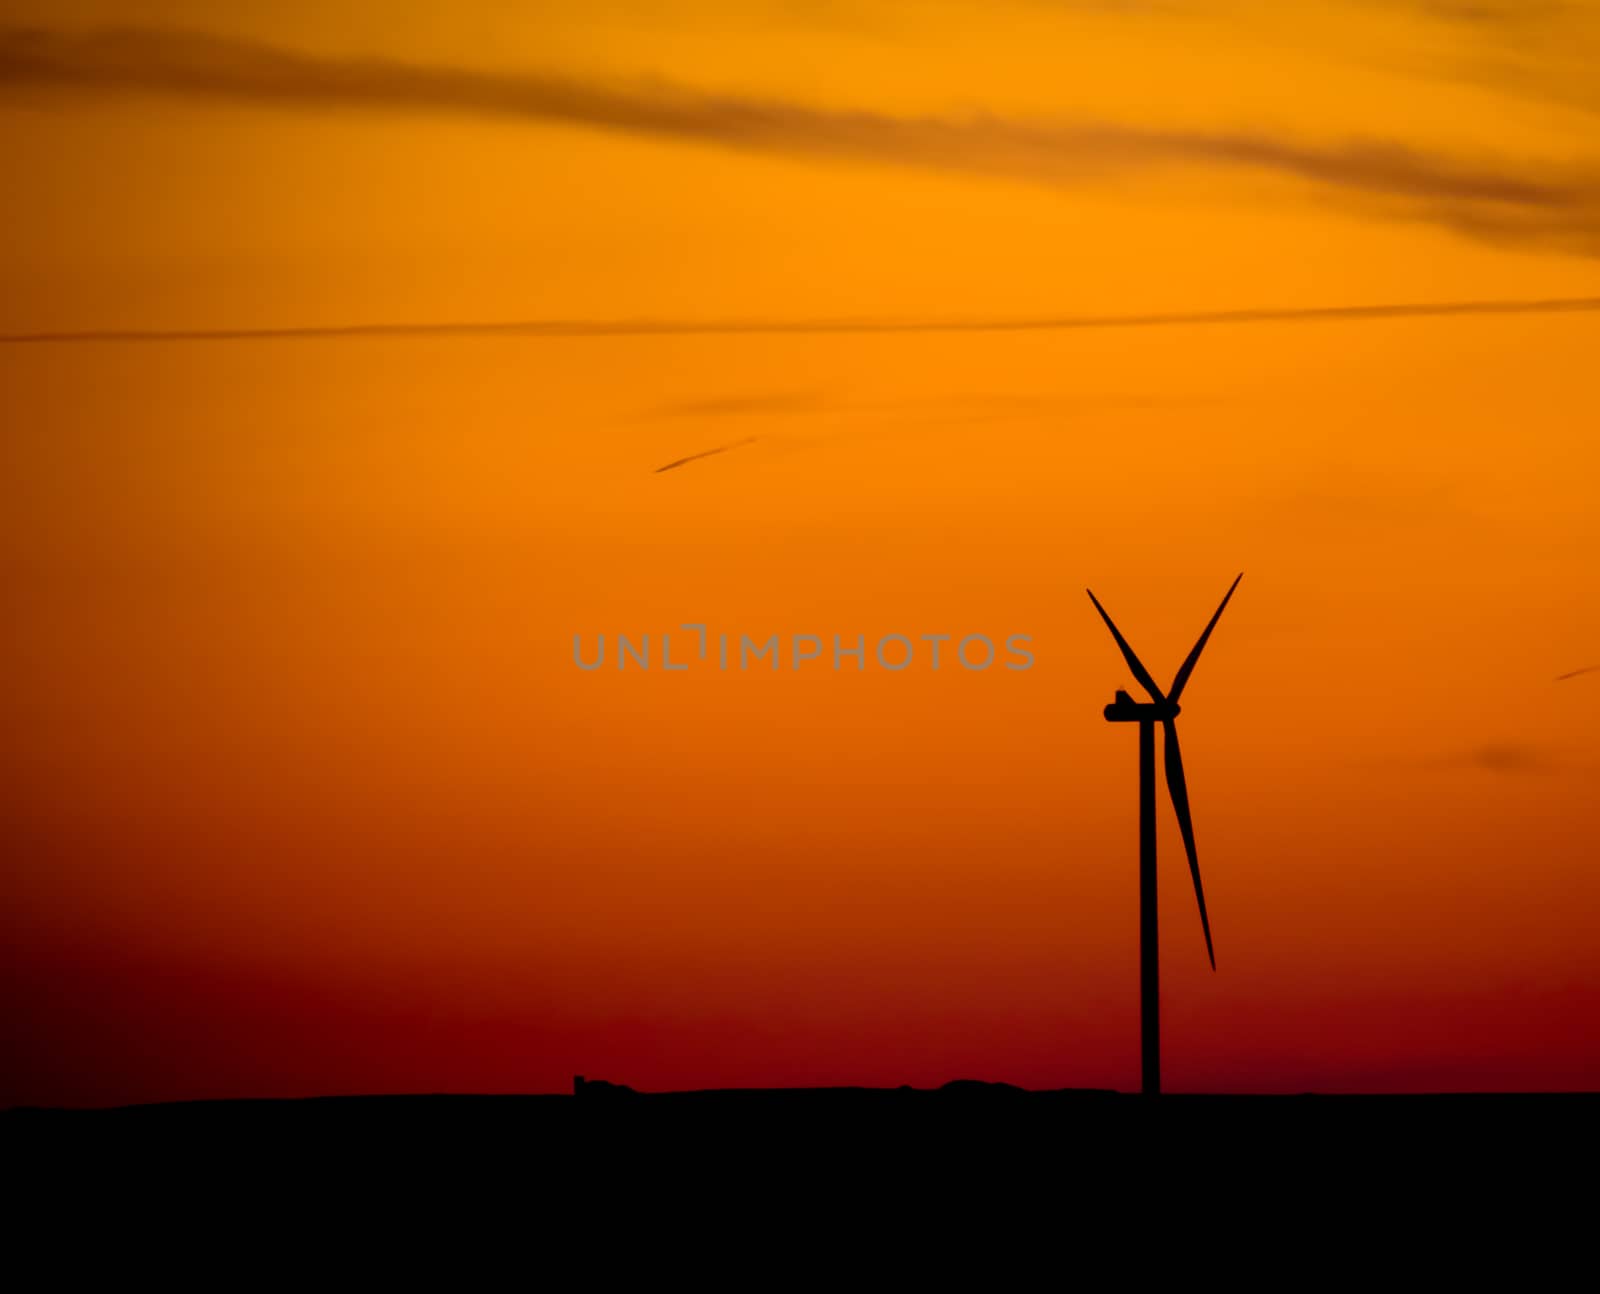 silhouette of  wind turbine at sunset, power and energy concept 